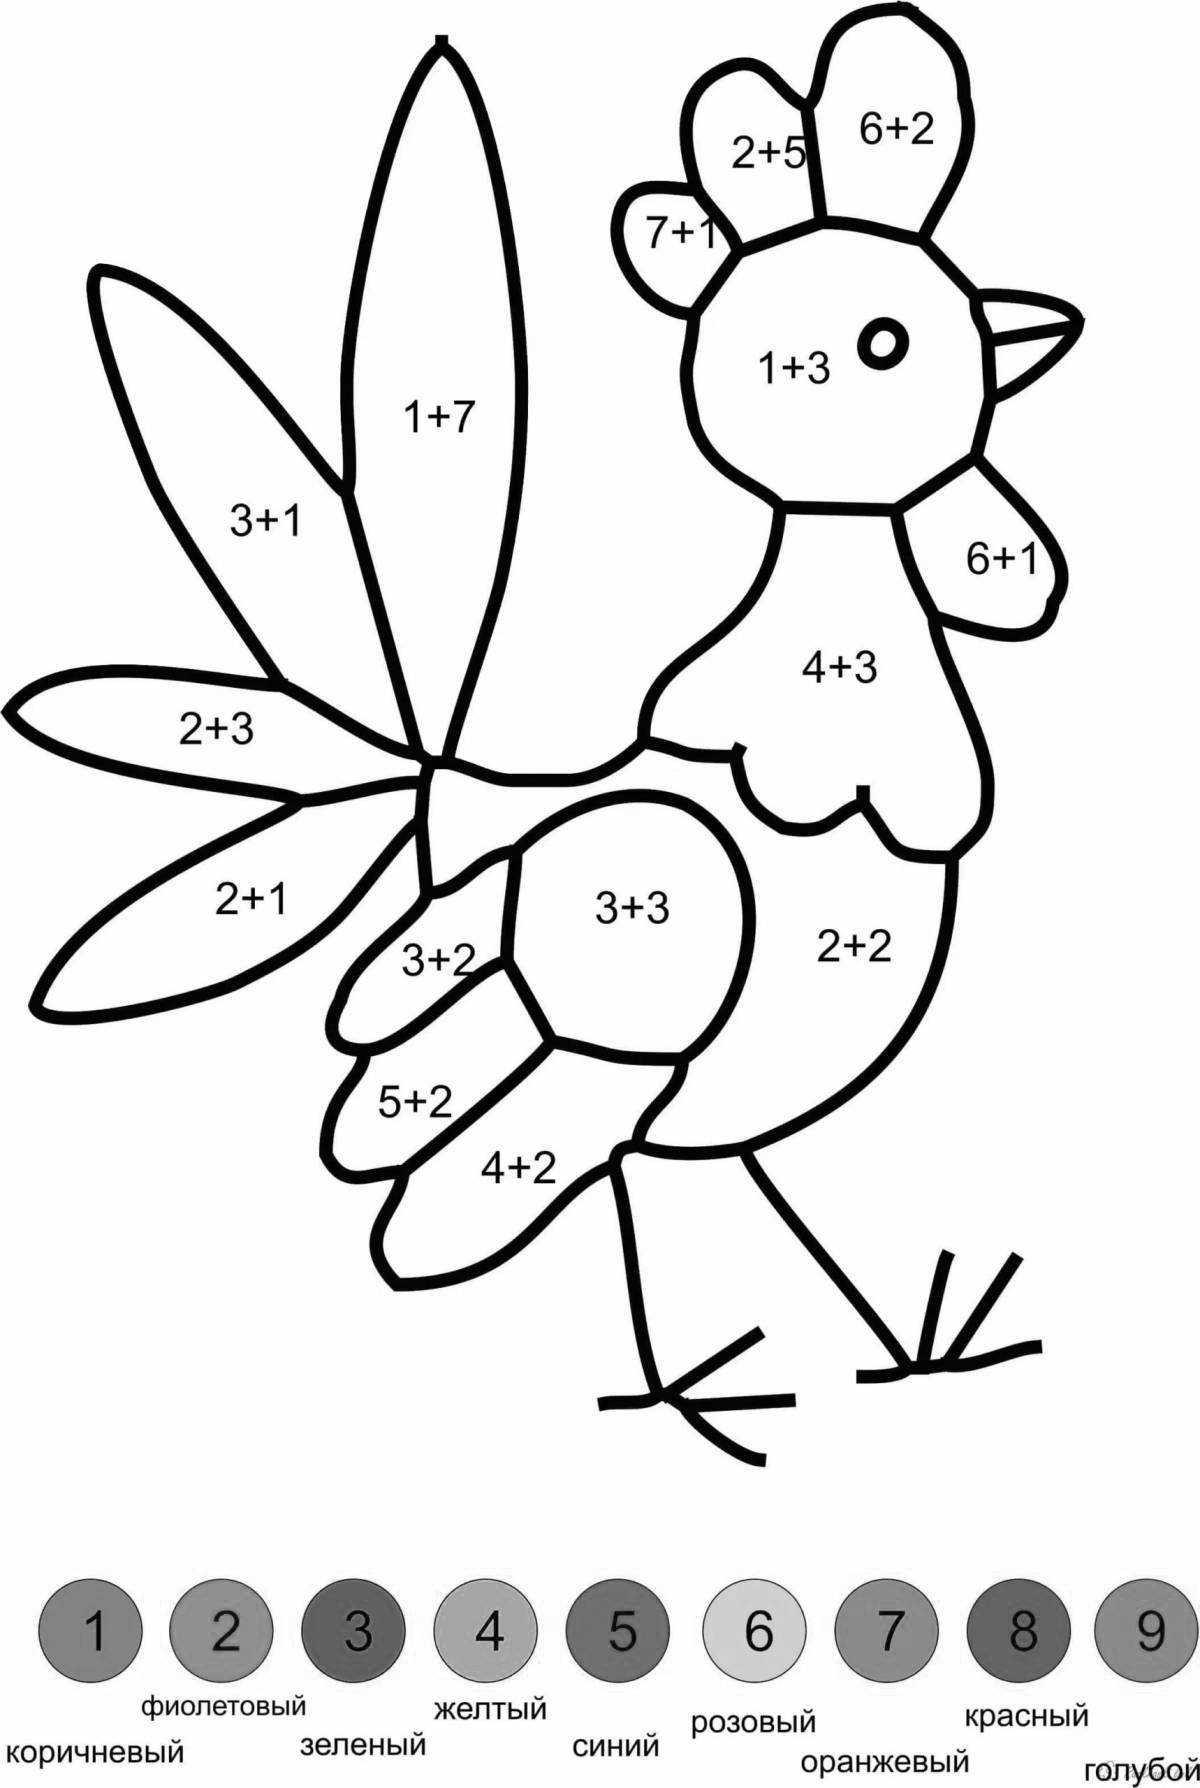 Creative coloring by numbers for 7 year olds with arithmetic examples